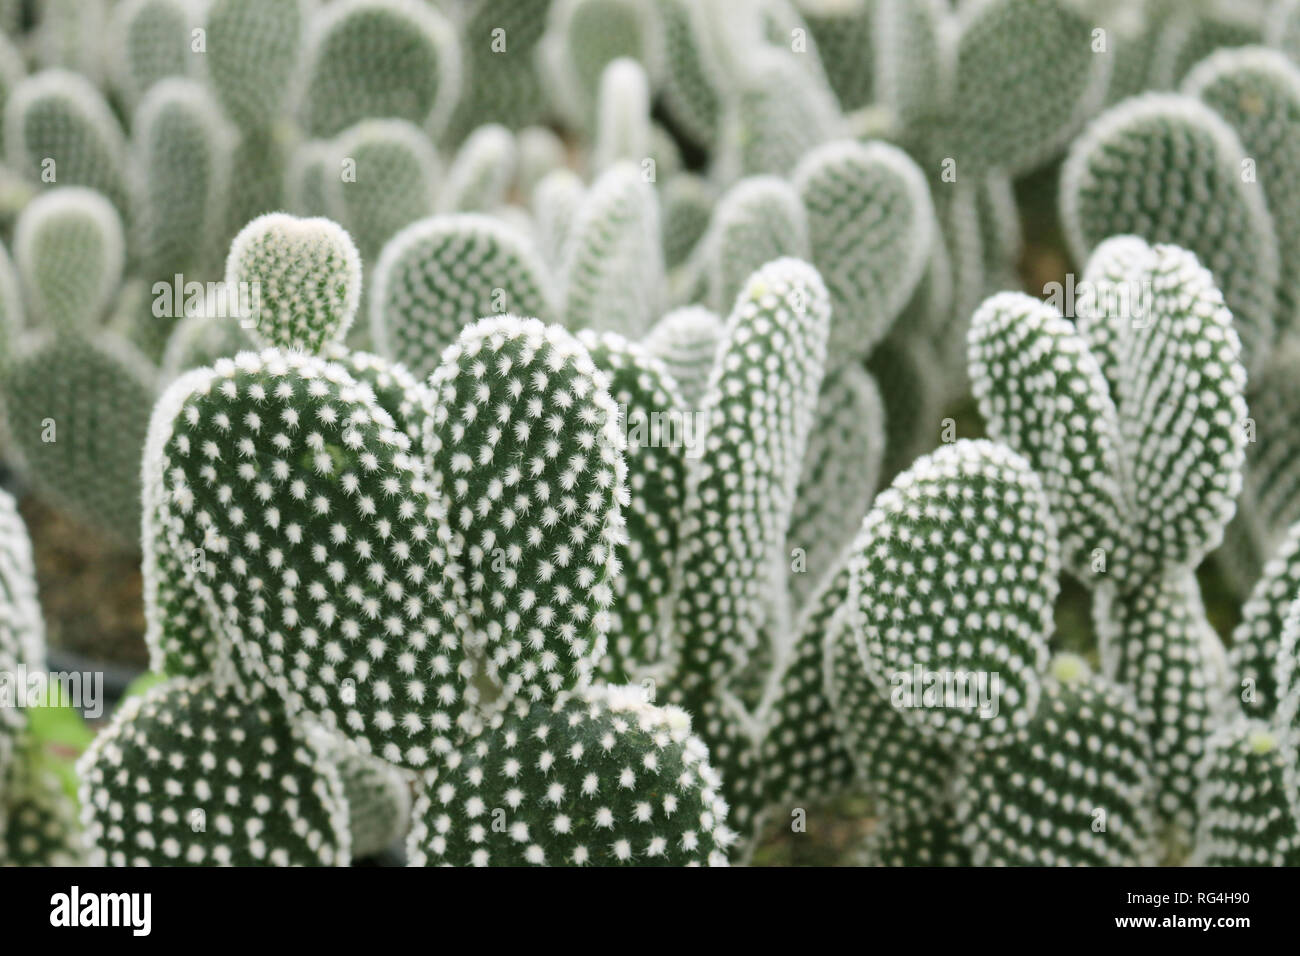 cactus cultivation. Vases with seedlings and closes of San Pedro Cactus (Wachuma) Stock Photo